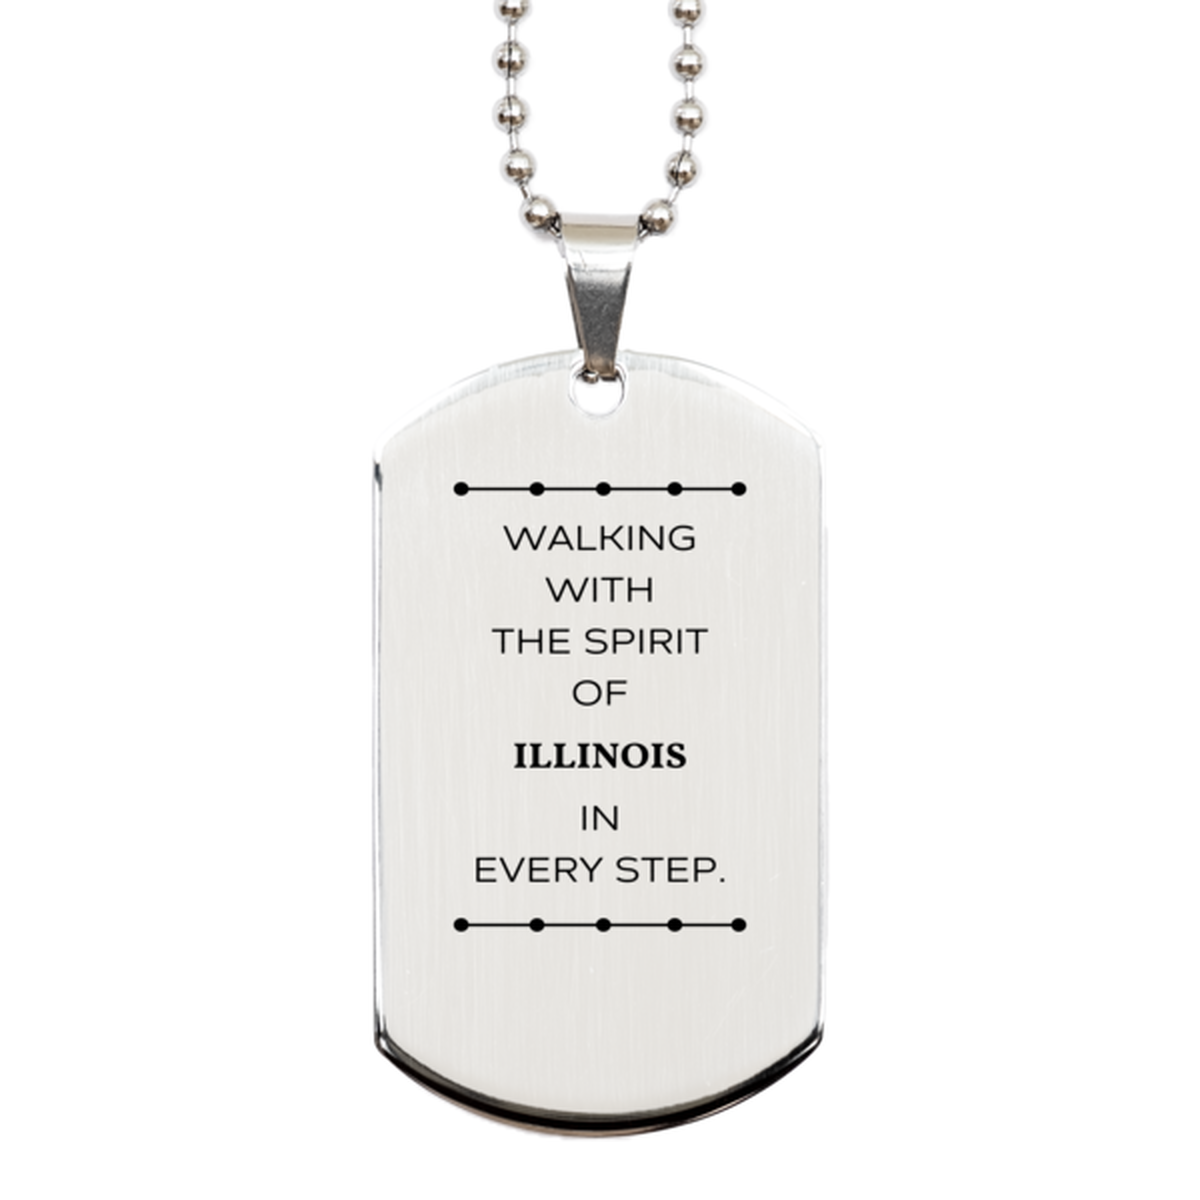 Illinois Gifts, Walking with the spirit, Love Illinois Birthday Christmas Silver Dog Tag For Illinois People, Men, Women, Friends